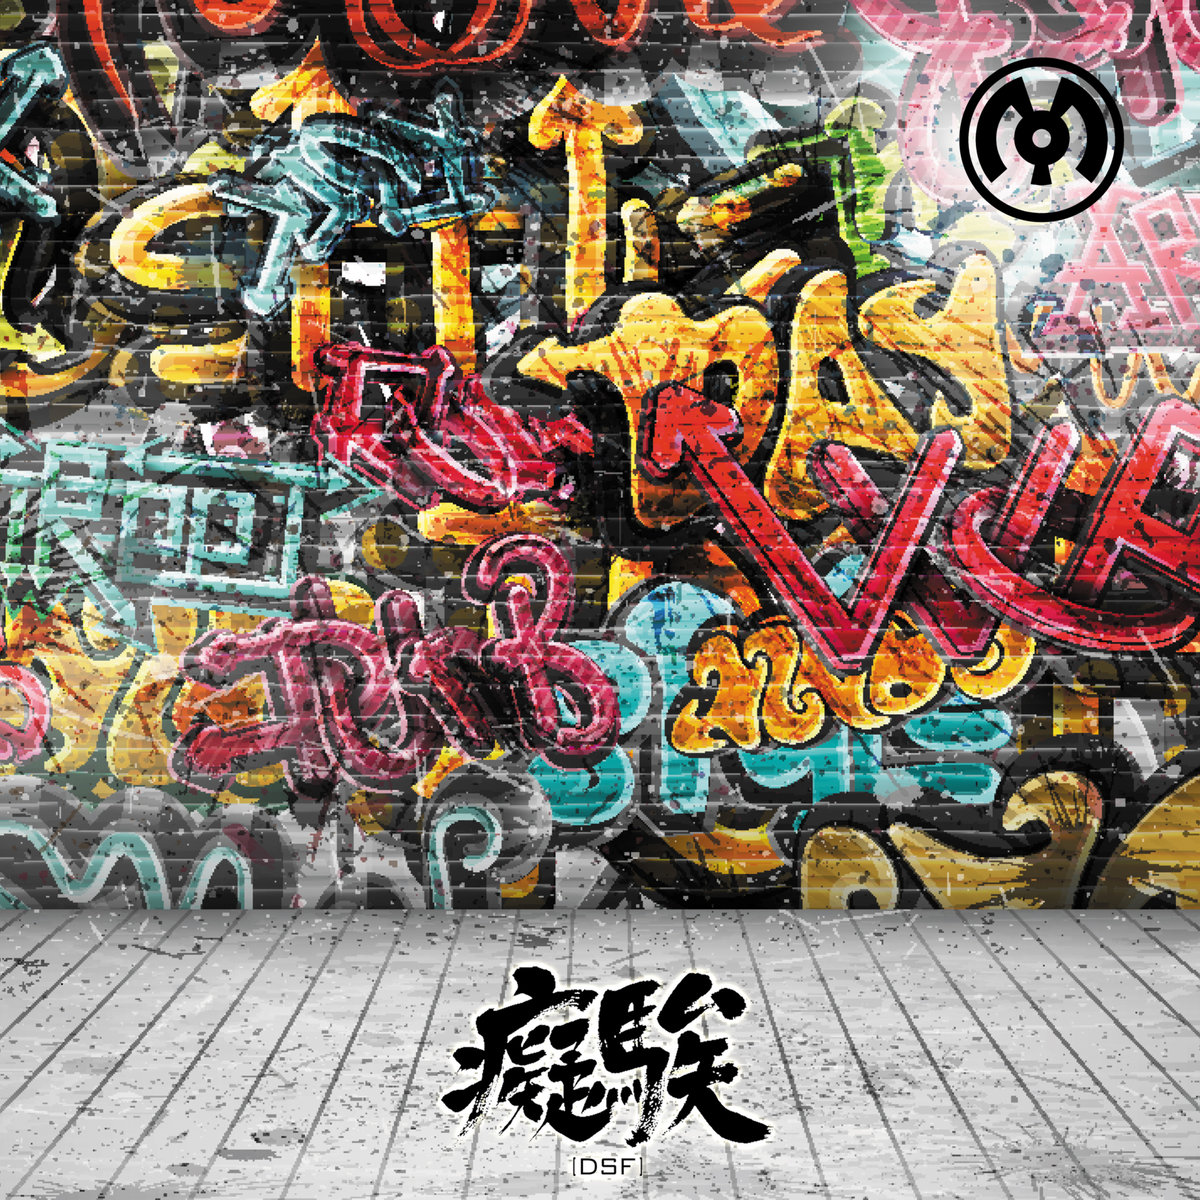 DSF - Speak Up @ 'DSF' album (electronic, dubstep)